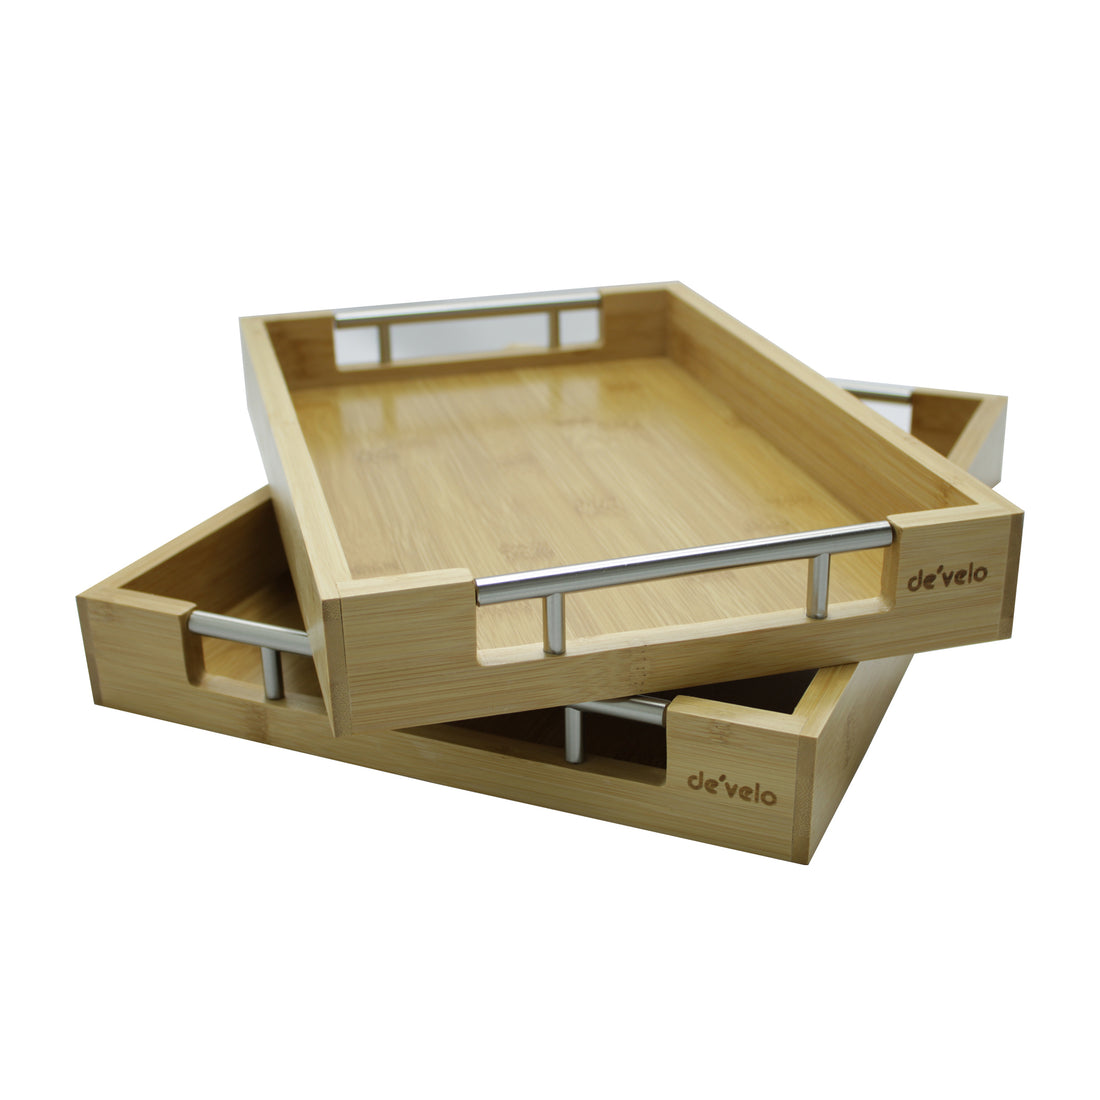 Bamboo Modern Serving Tray with Metal Handles (Set of 2)